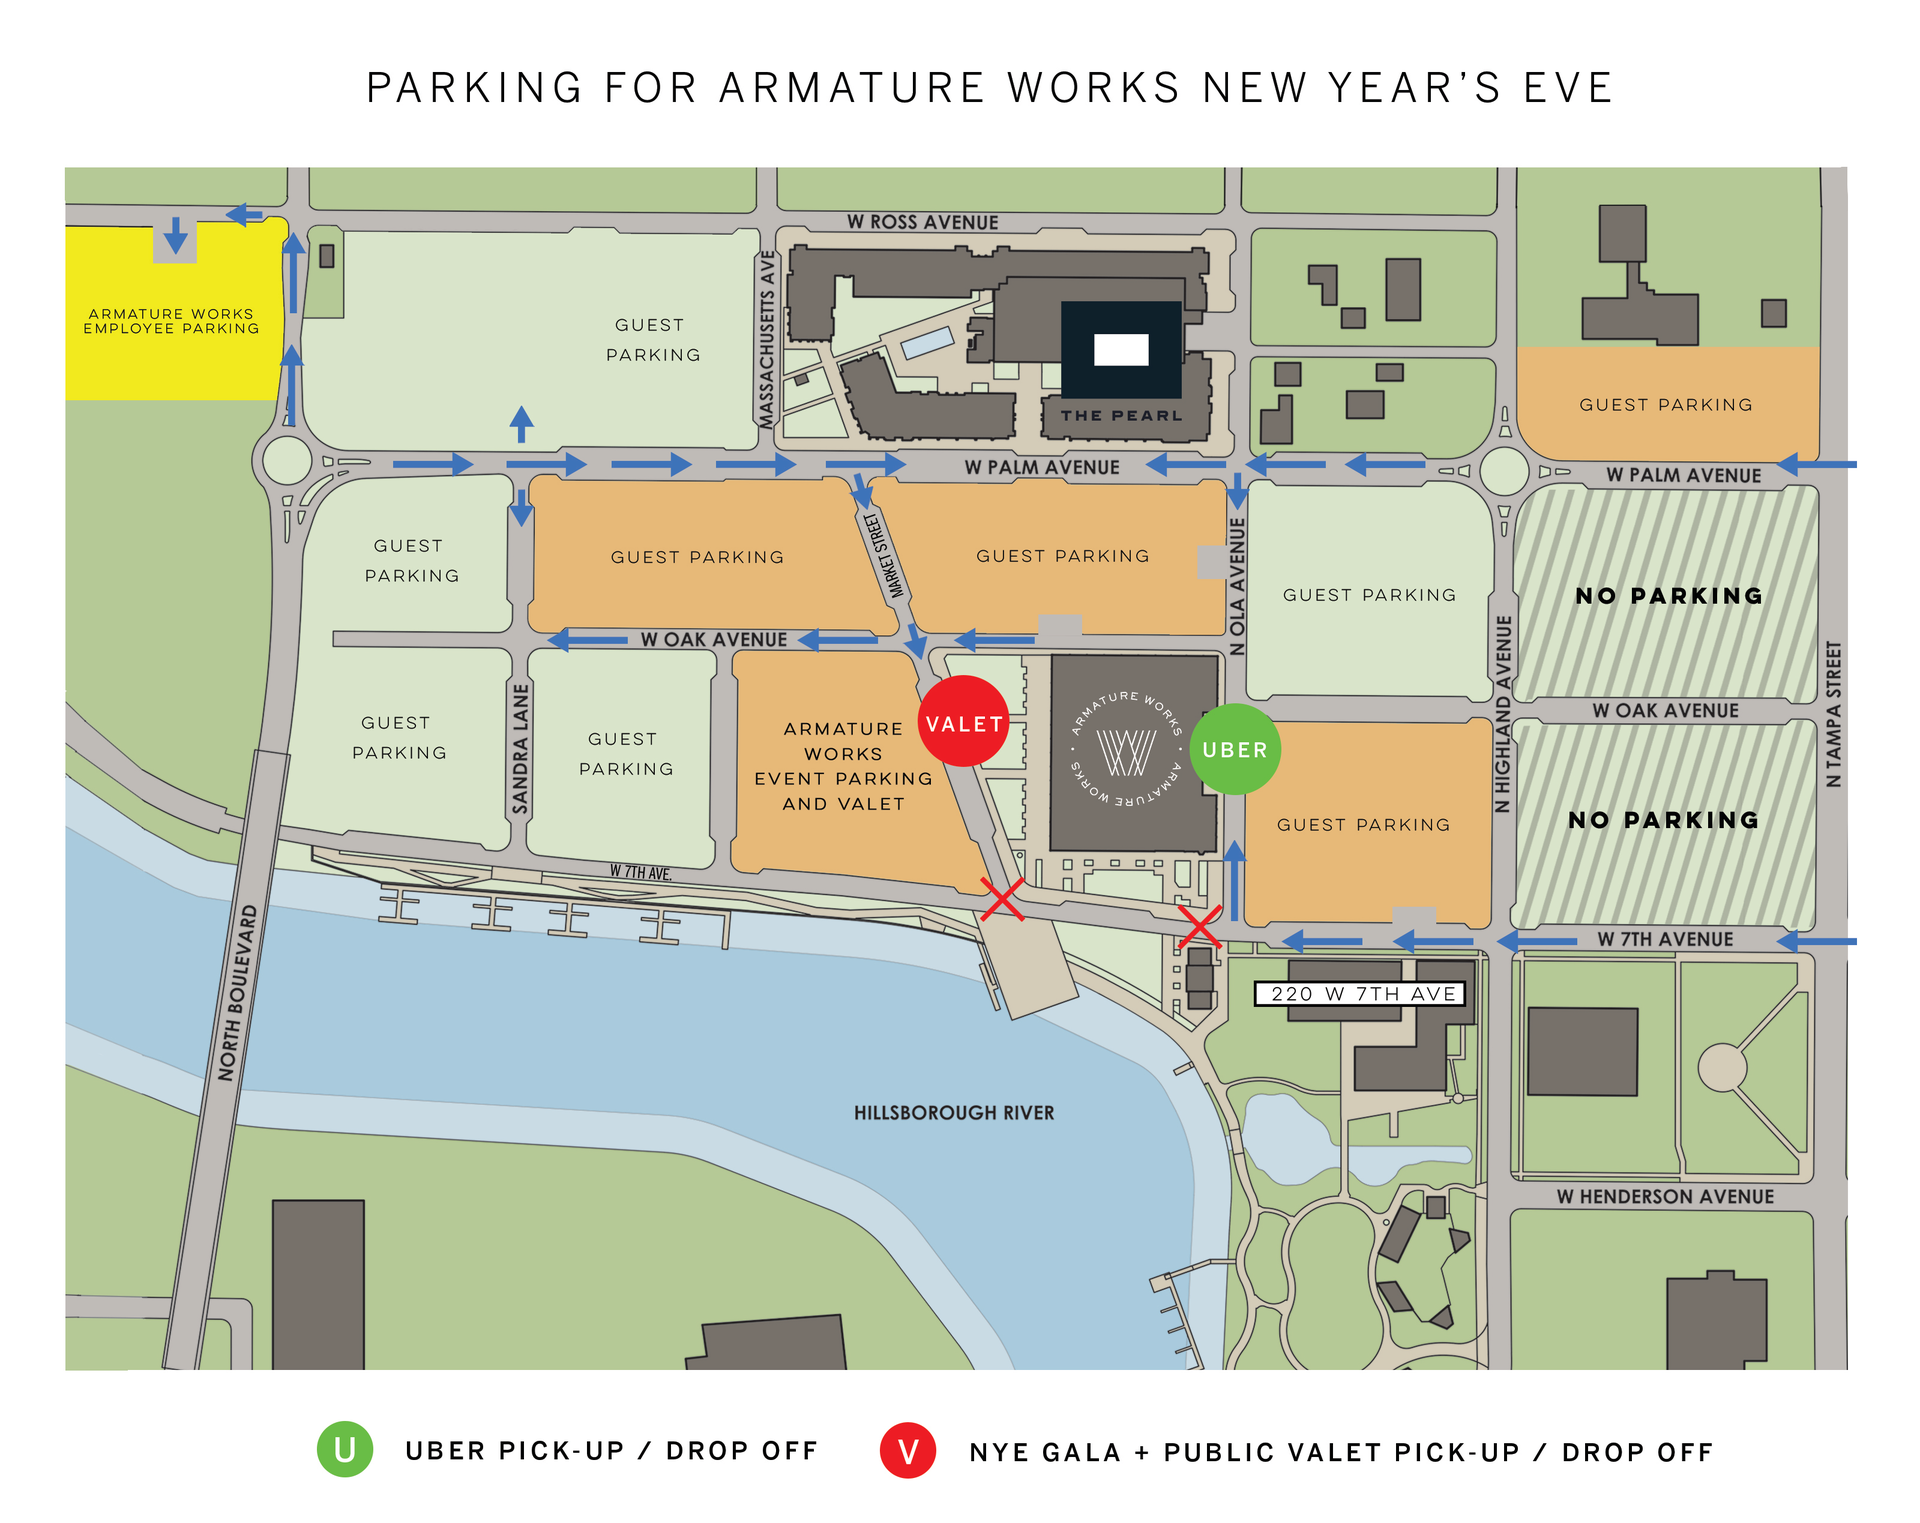 Where to park at Armature Works in Tampa this New Year's Eve Creative